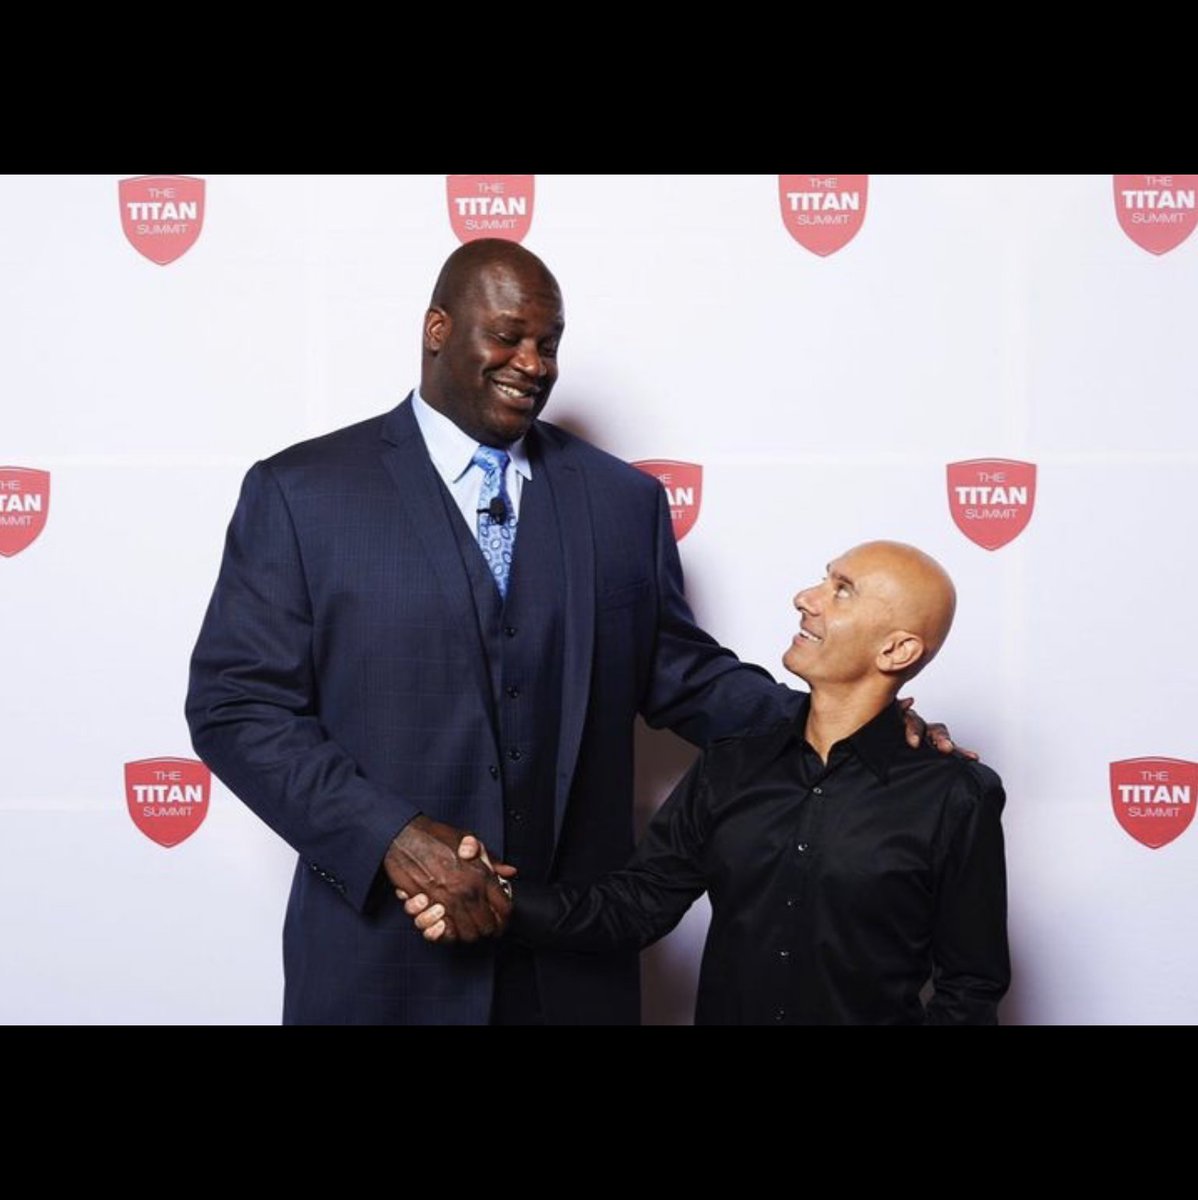 Shaquille O'Neal is someone I really look up to as an athlete 😅. Who do YOU look up to? Love, Robin